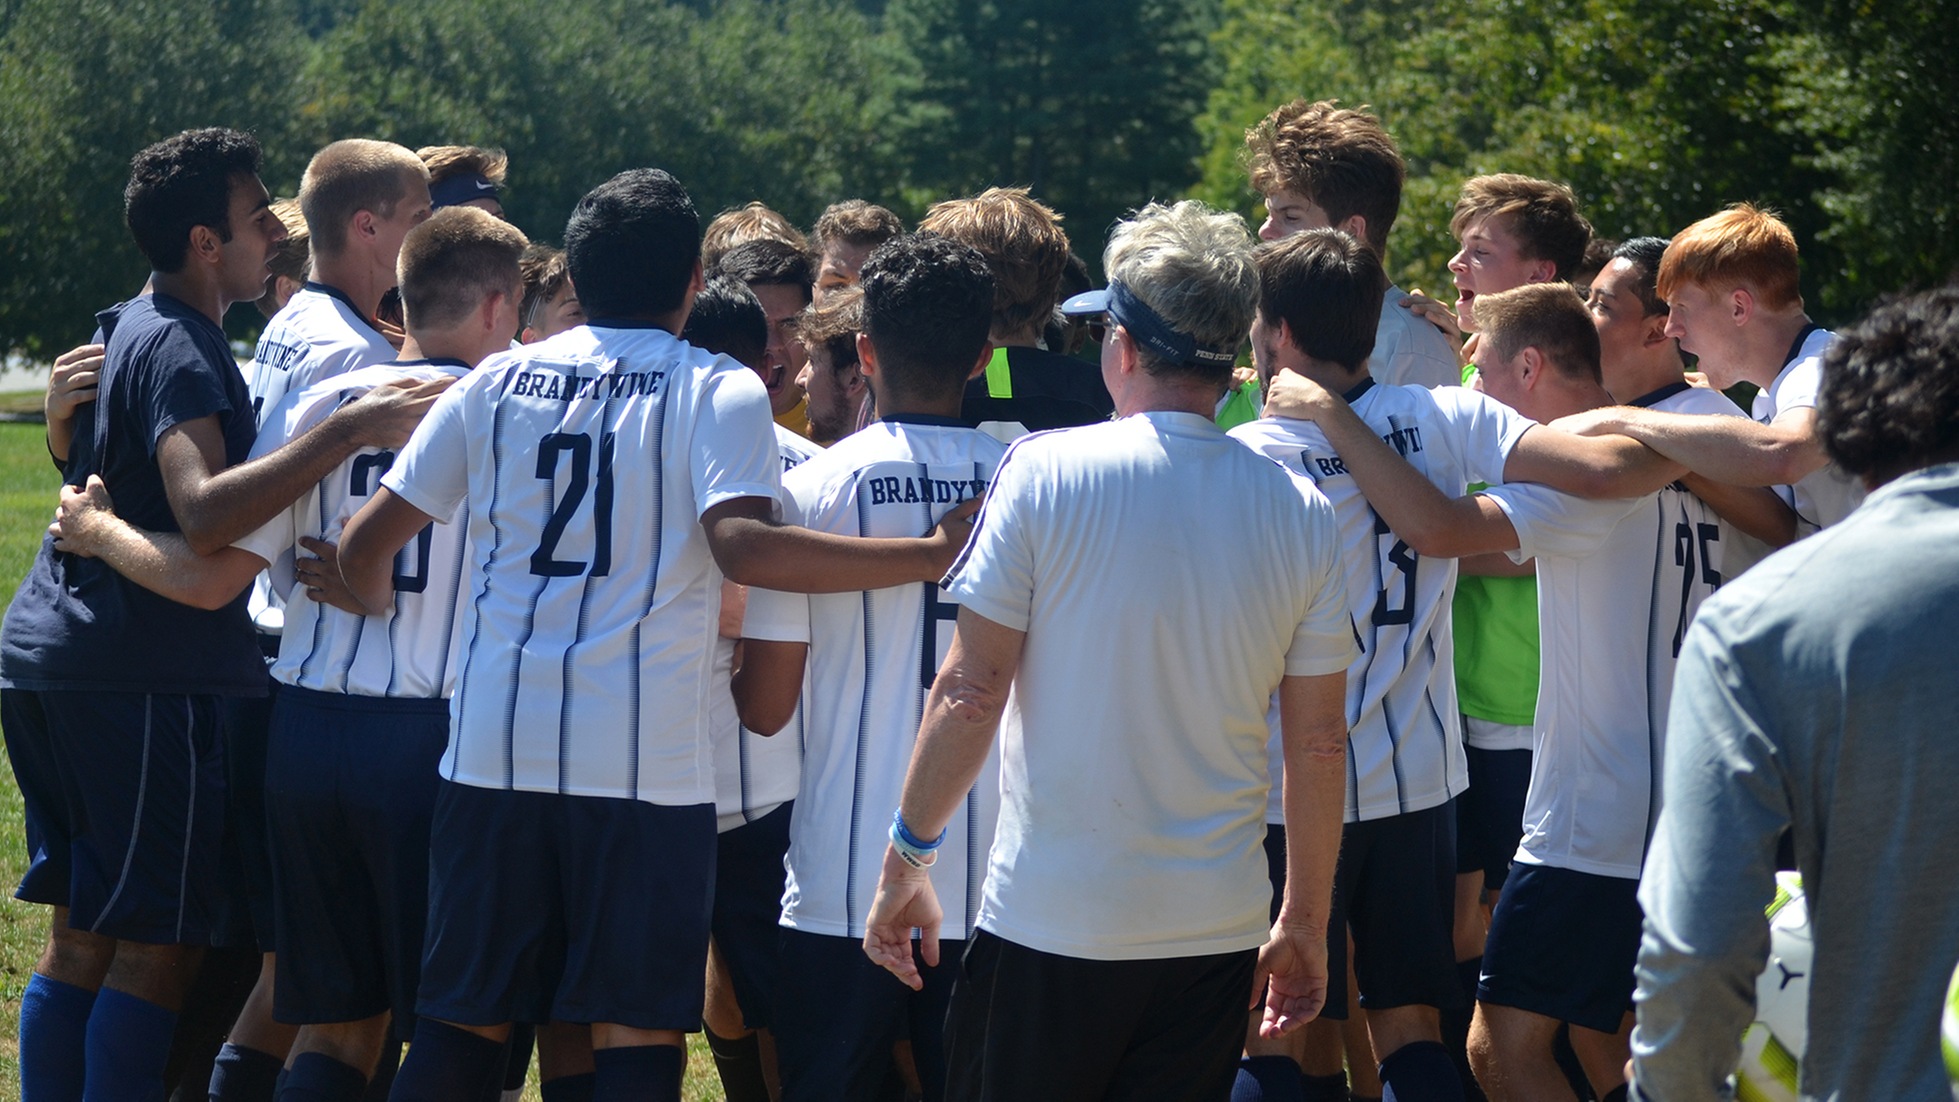 Men's soccer was one of Brandywine's 15 teams with a GPA of 3.0 or greater during the 2019-20 year